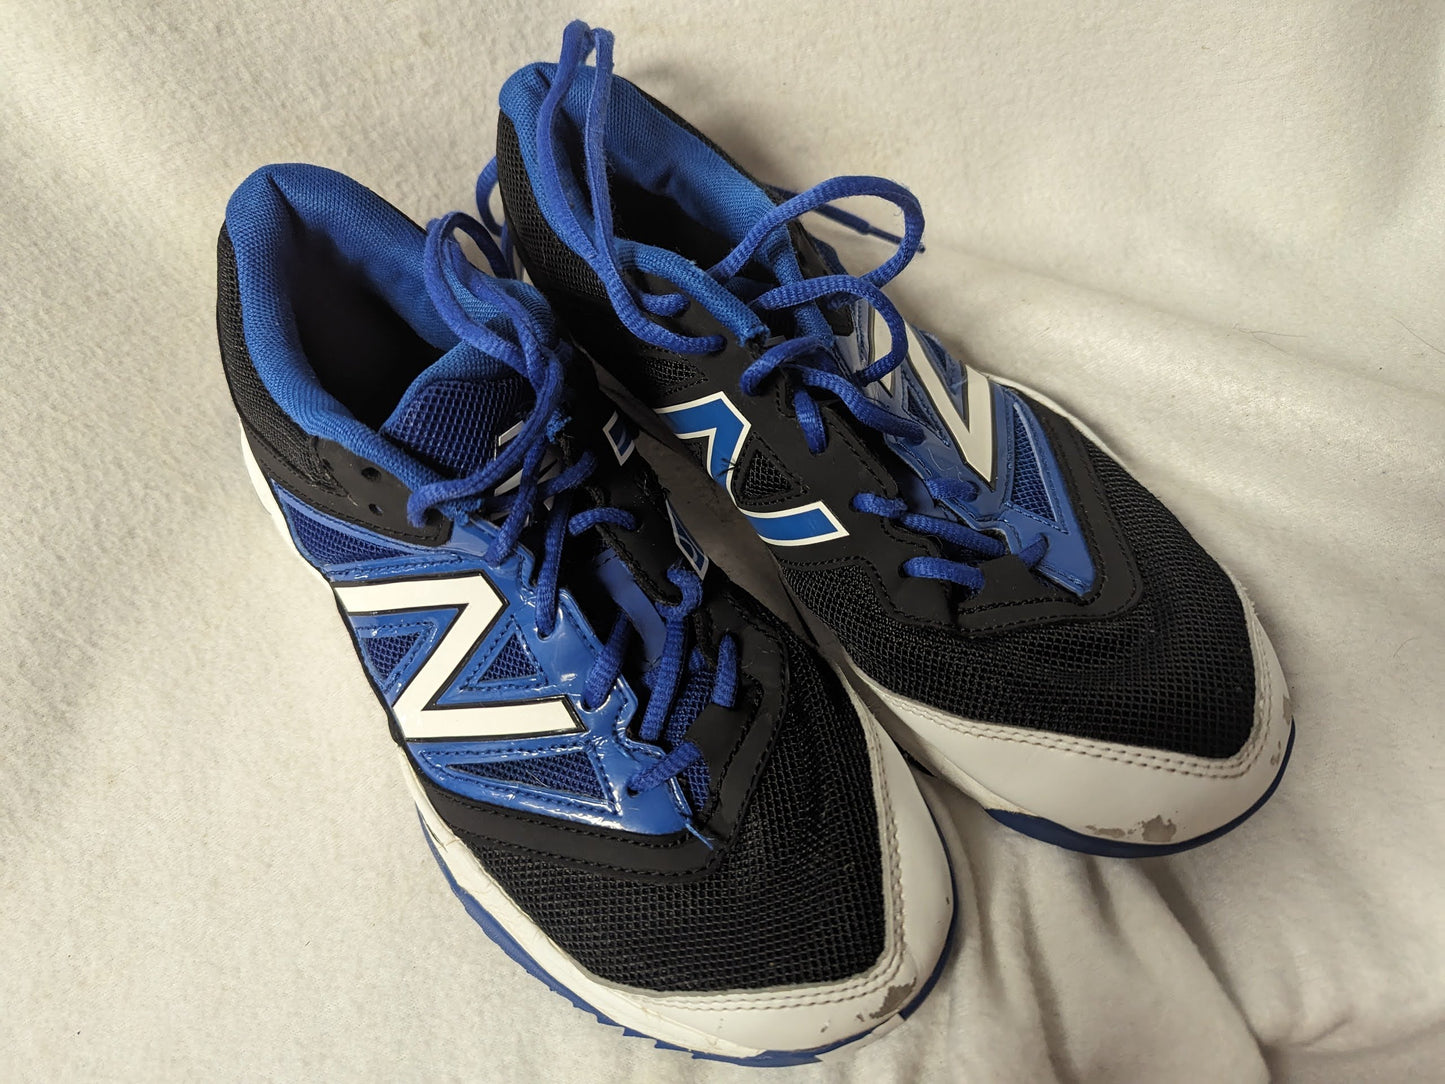 New Balance Athletic Shoes Size 7.5 Color Blue Condition Used